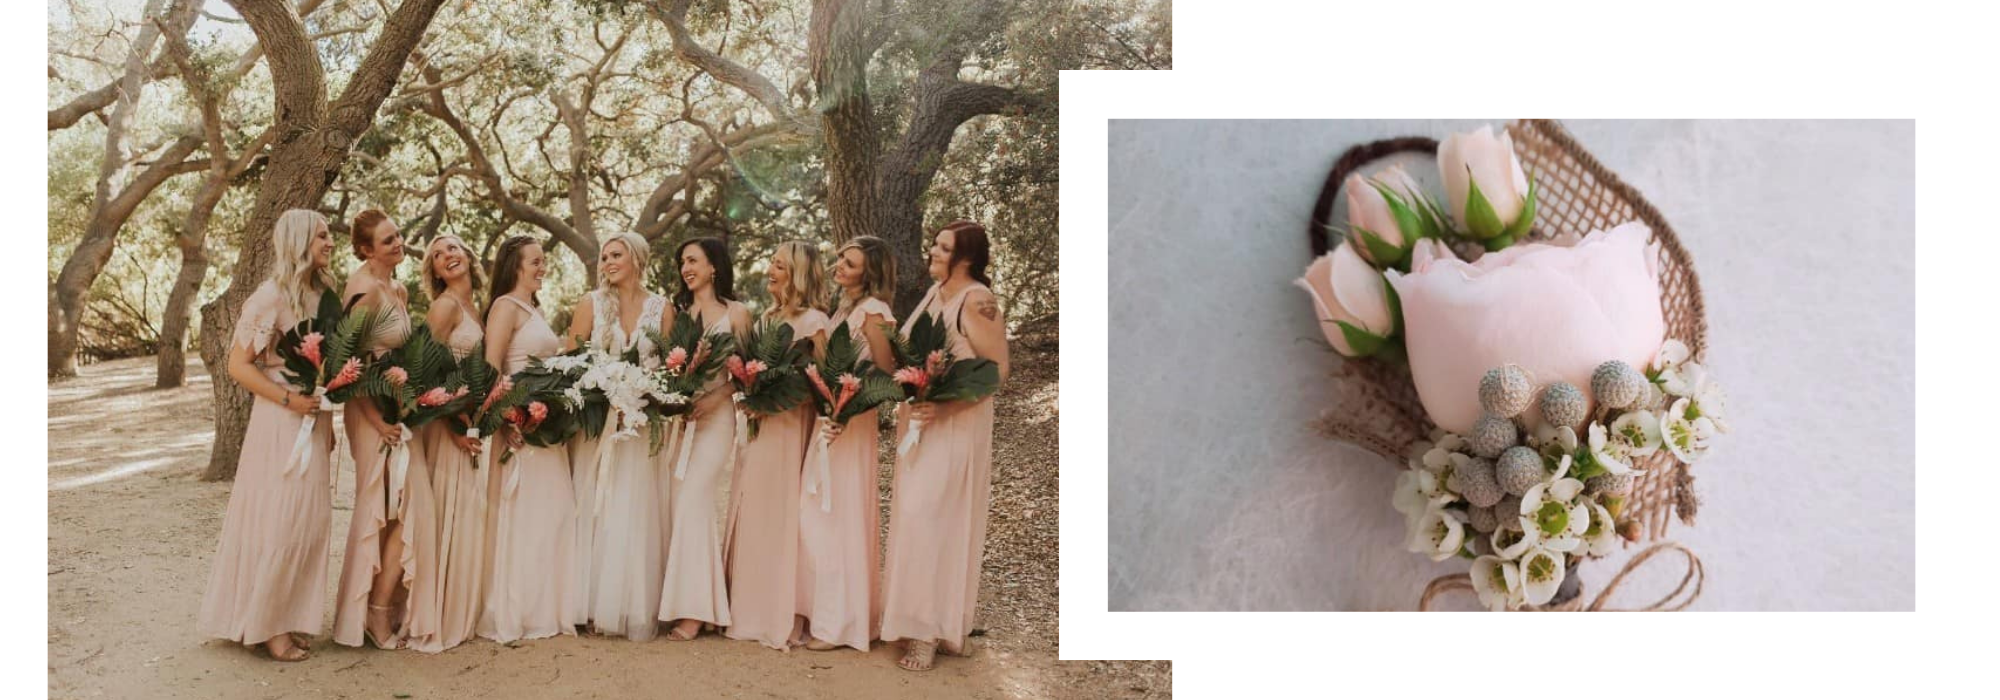 collage of bridal party with bride and pink rose boutonniere